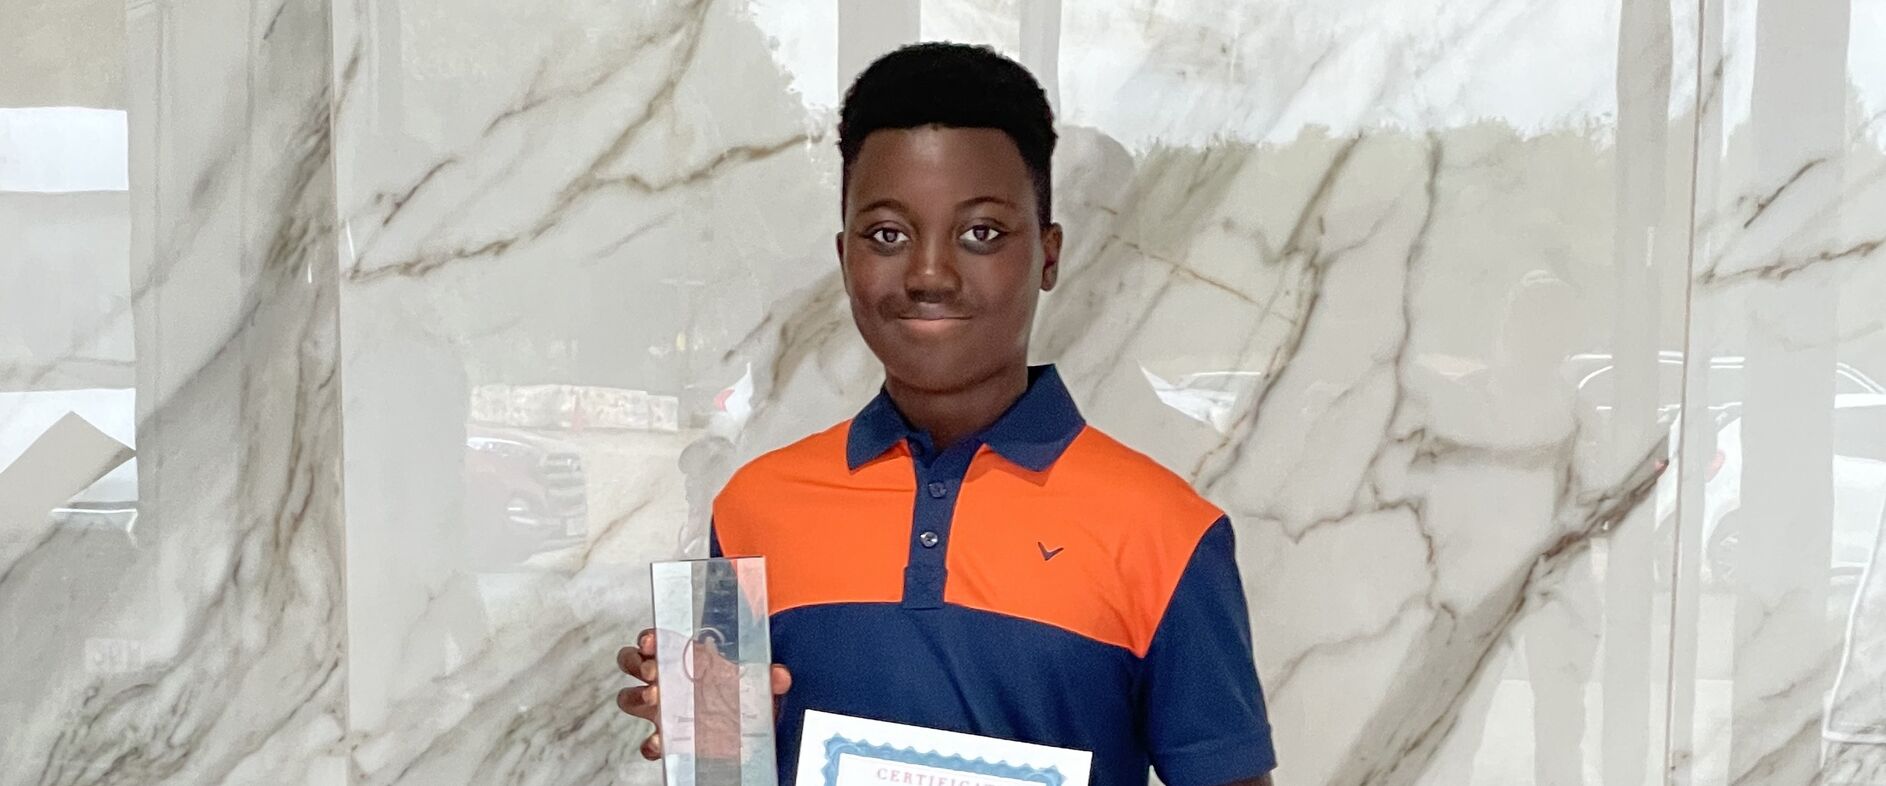 Congratulations to Hayden Sarfo - IMG Age Group National Champion for third year in a row